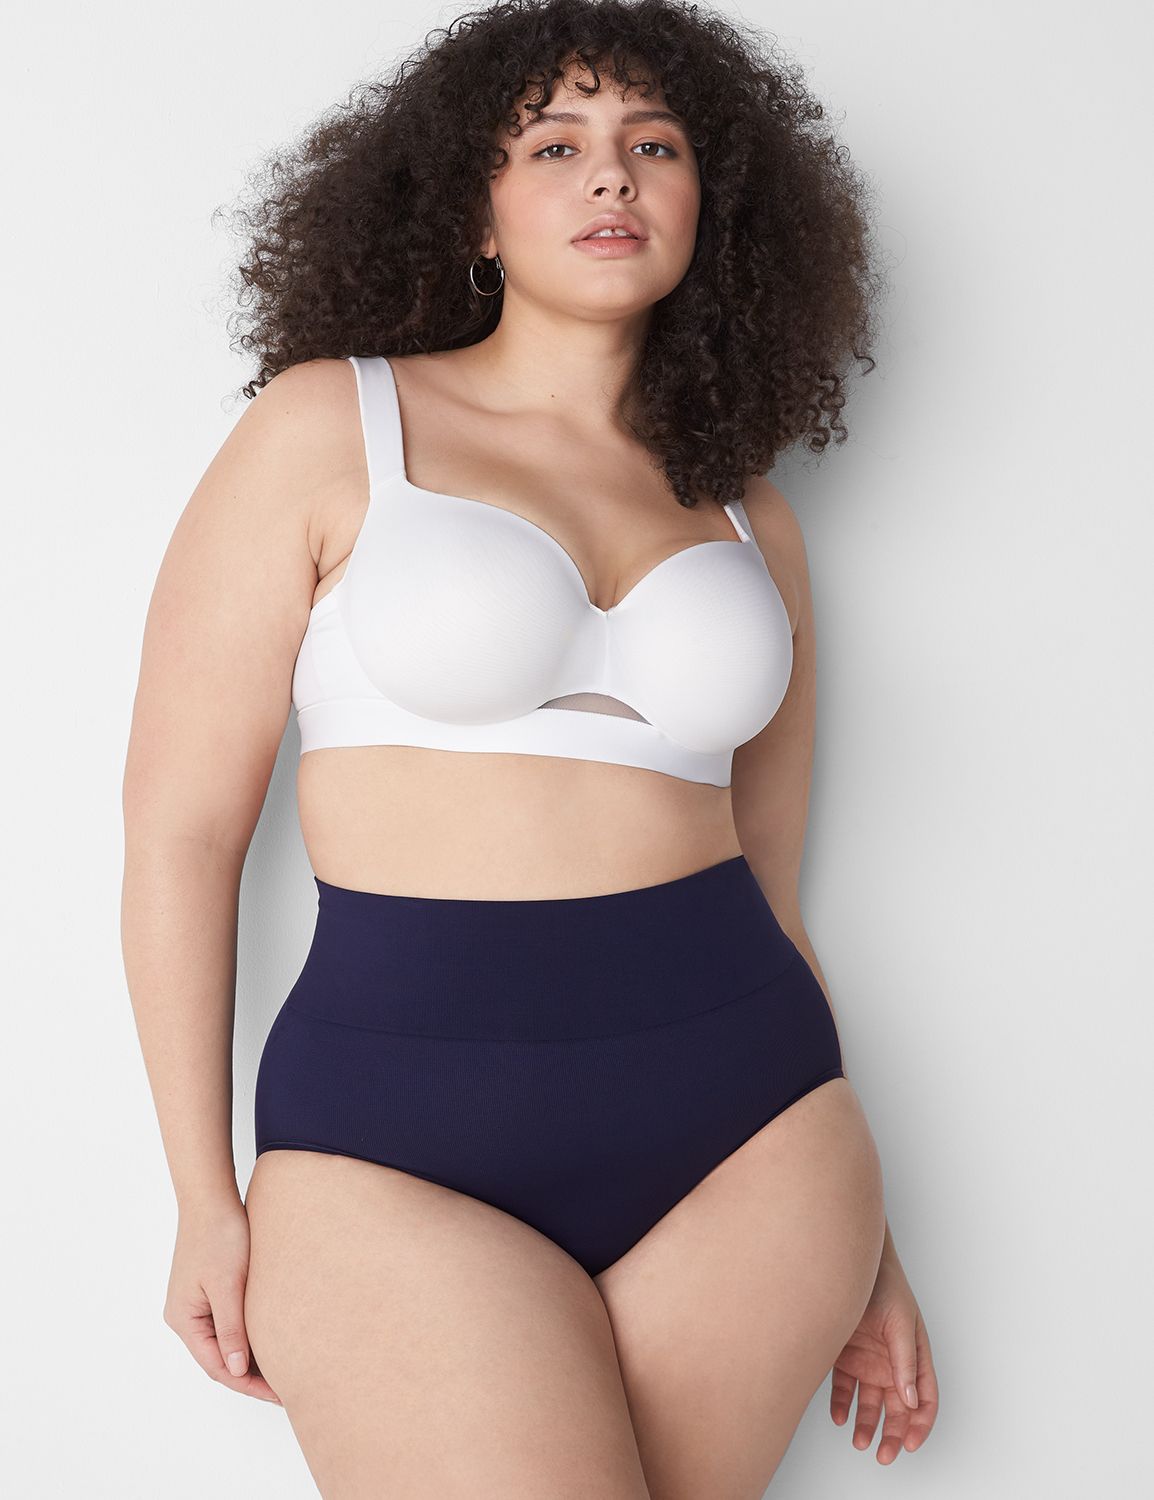 Lane Bryant - “If you have issues with normal boyshorts then try